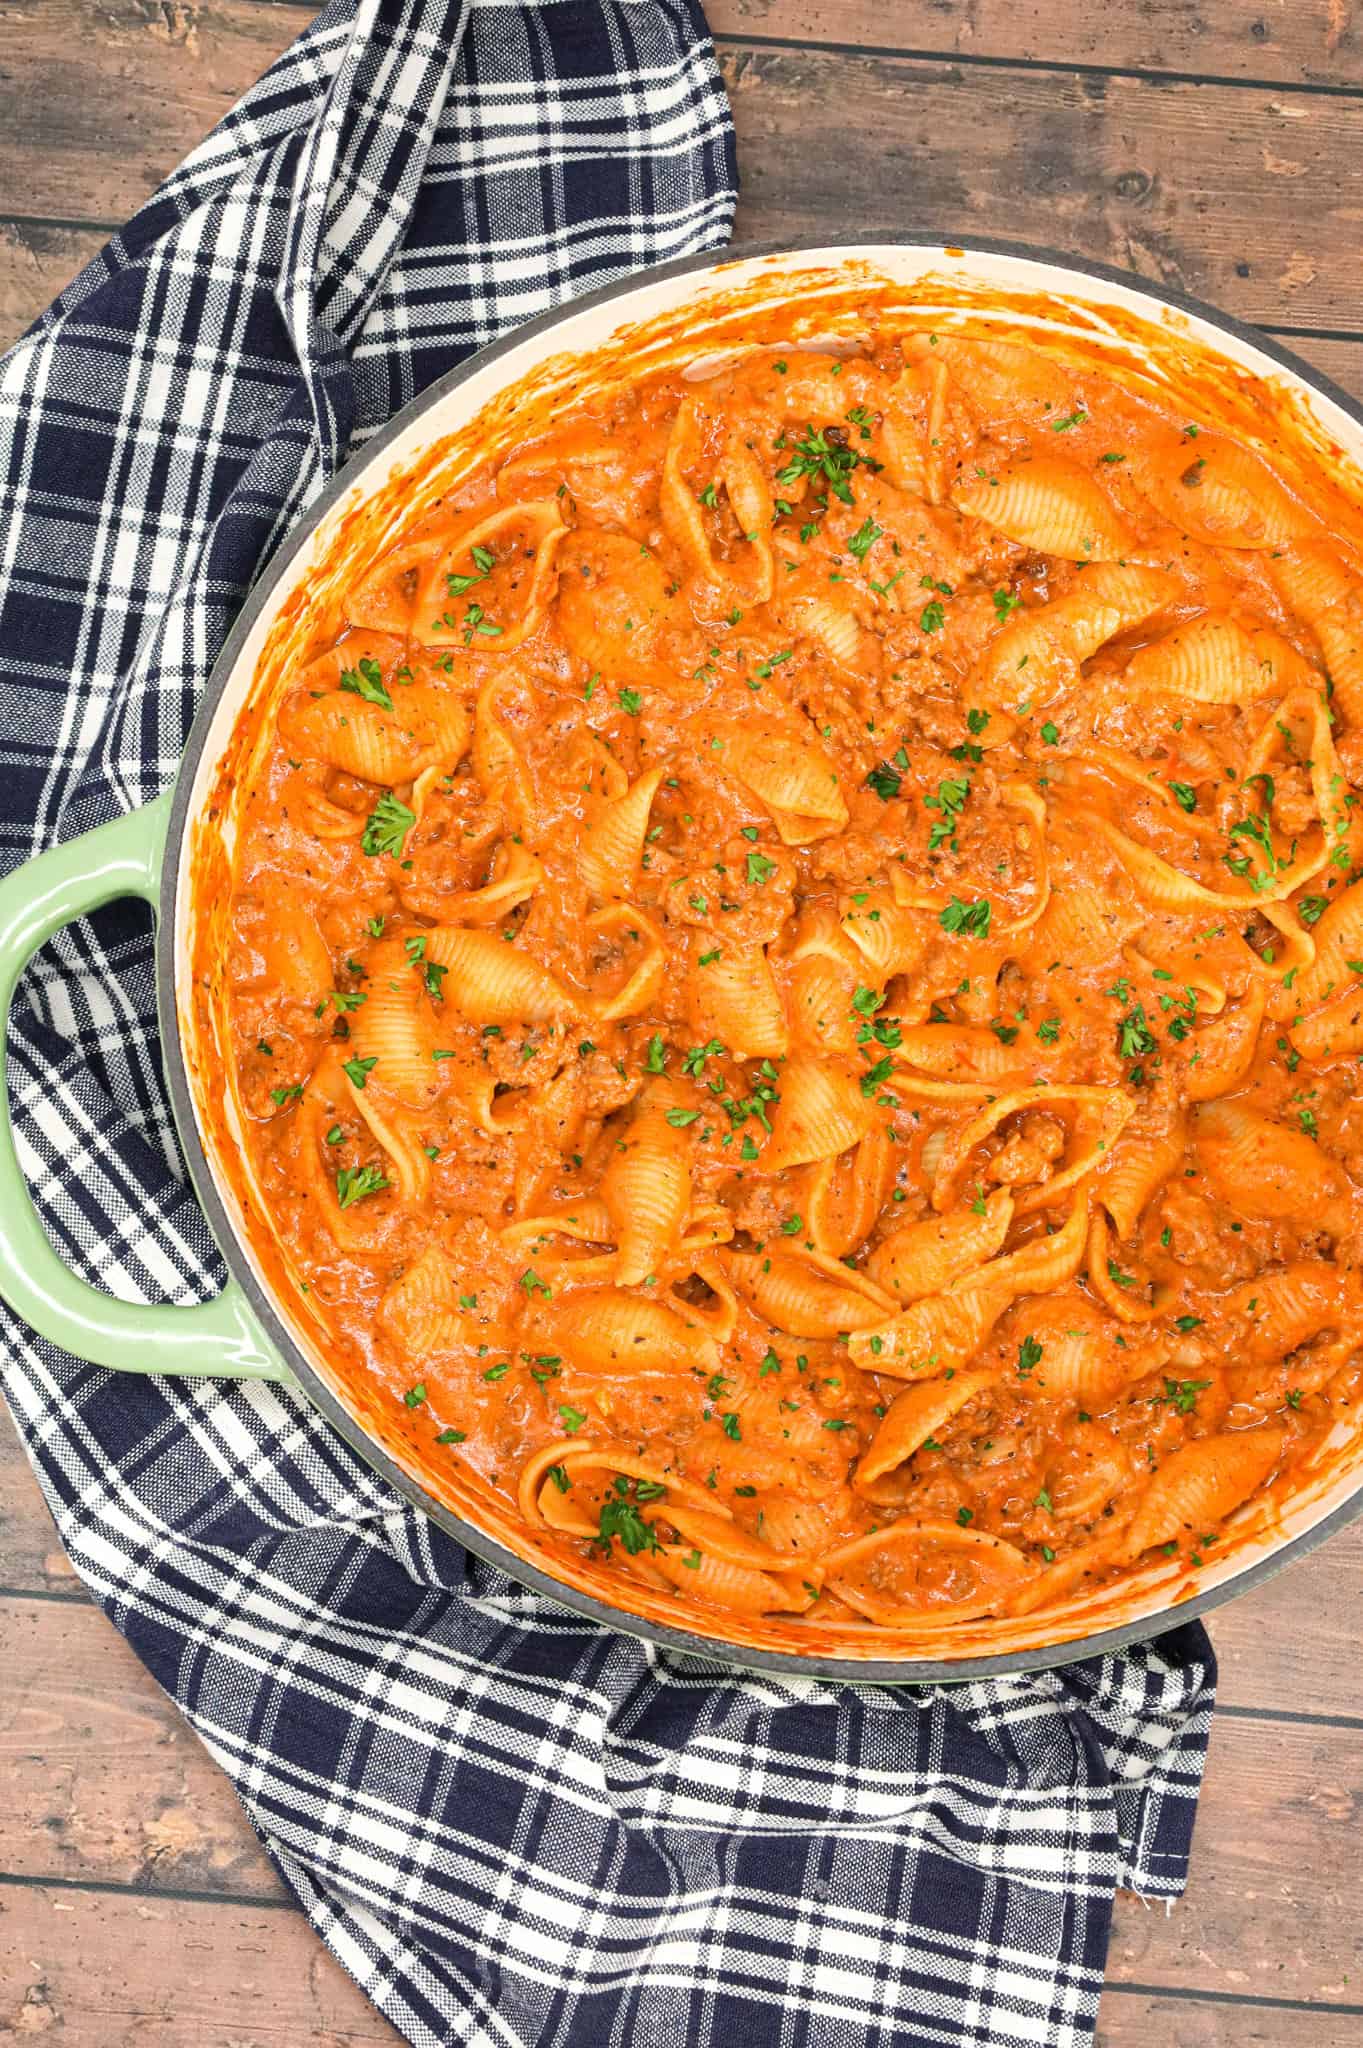 Creamy Beef and Shells is an easy ground beef pasta recipe with a creamy tomato sauce made with marinara, sour cream, heavy cream and shredded cheddar cheese.